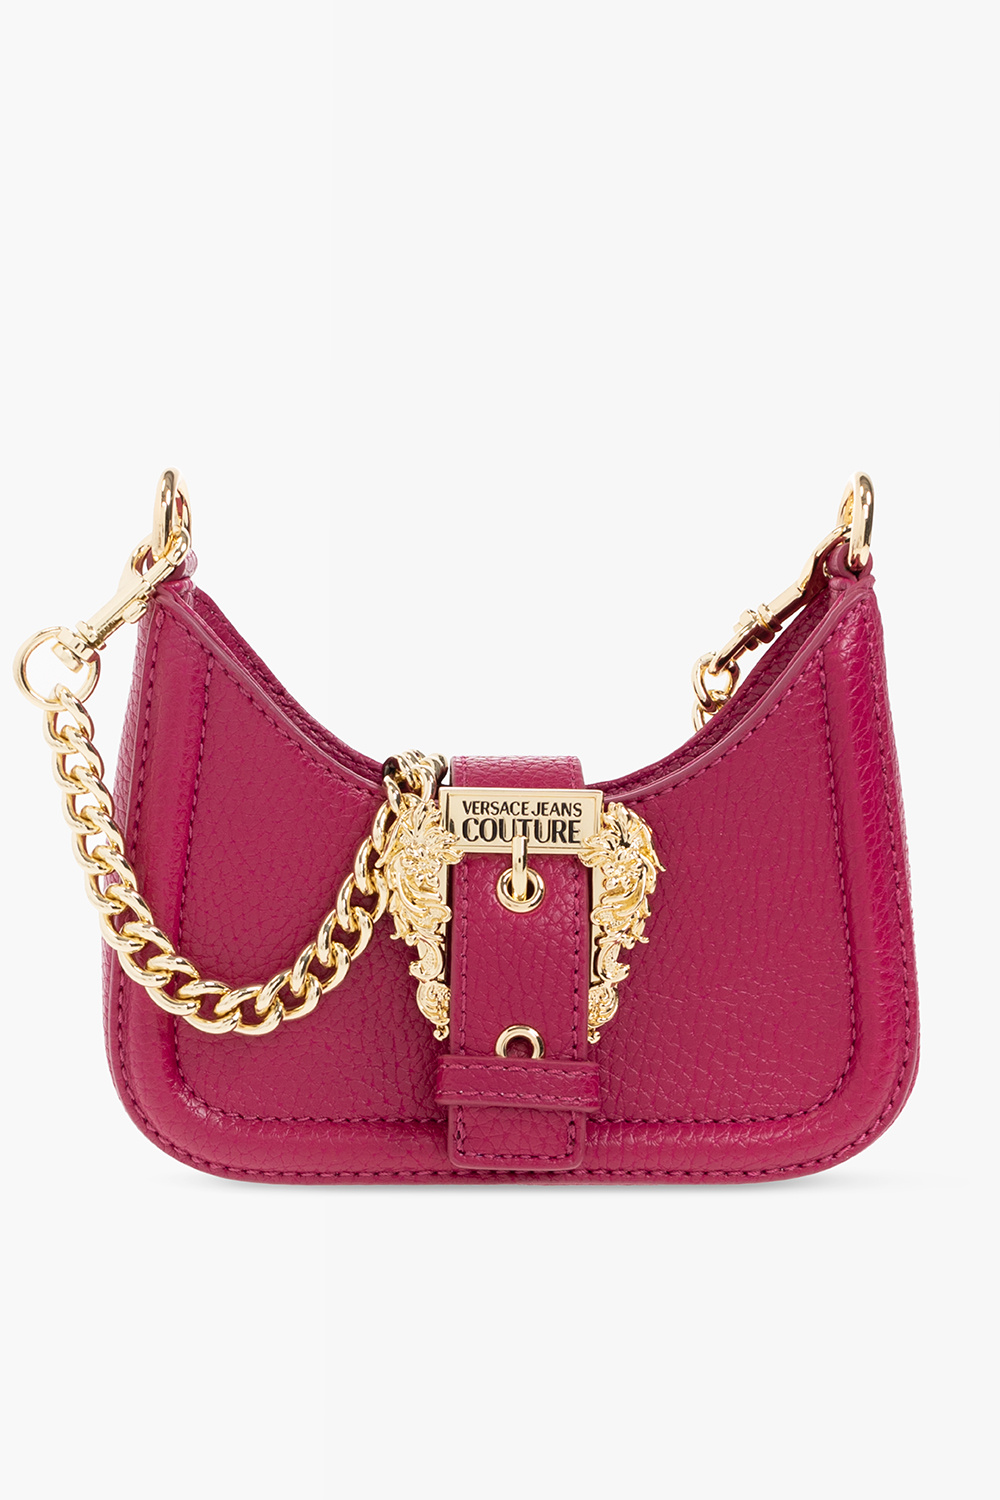 Versace Jeans Couture Buckle Small Hobo Bag in Pink Womens Bags Hobo bags and purses 